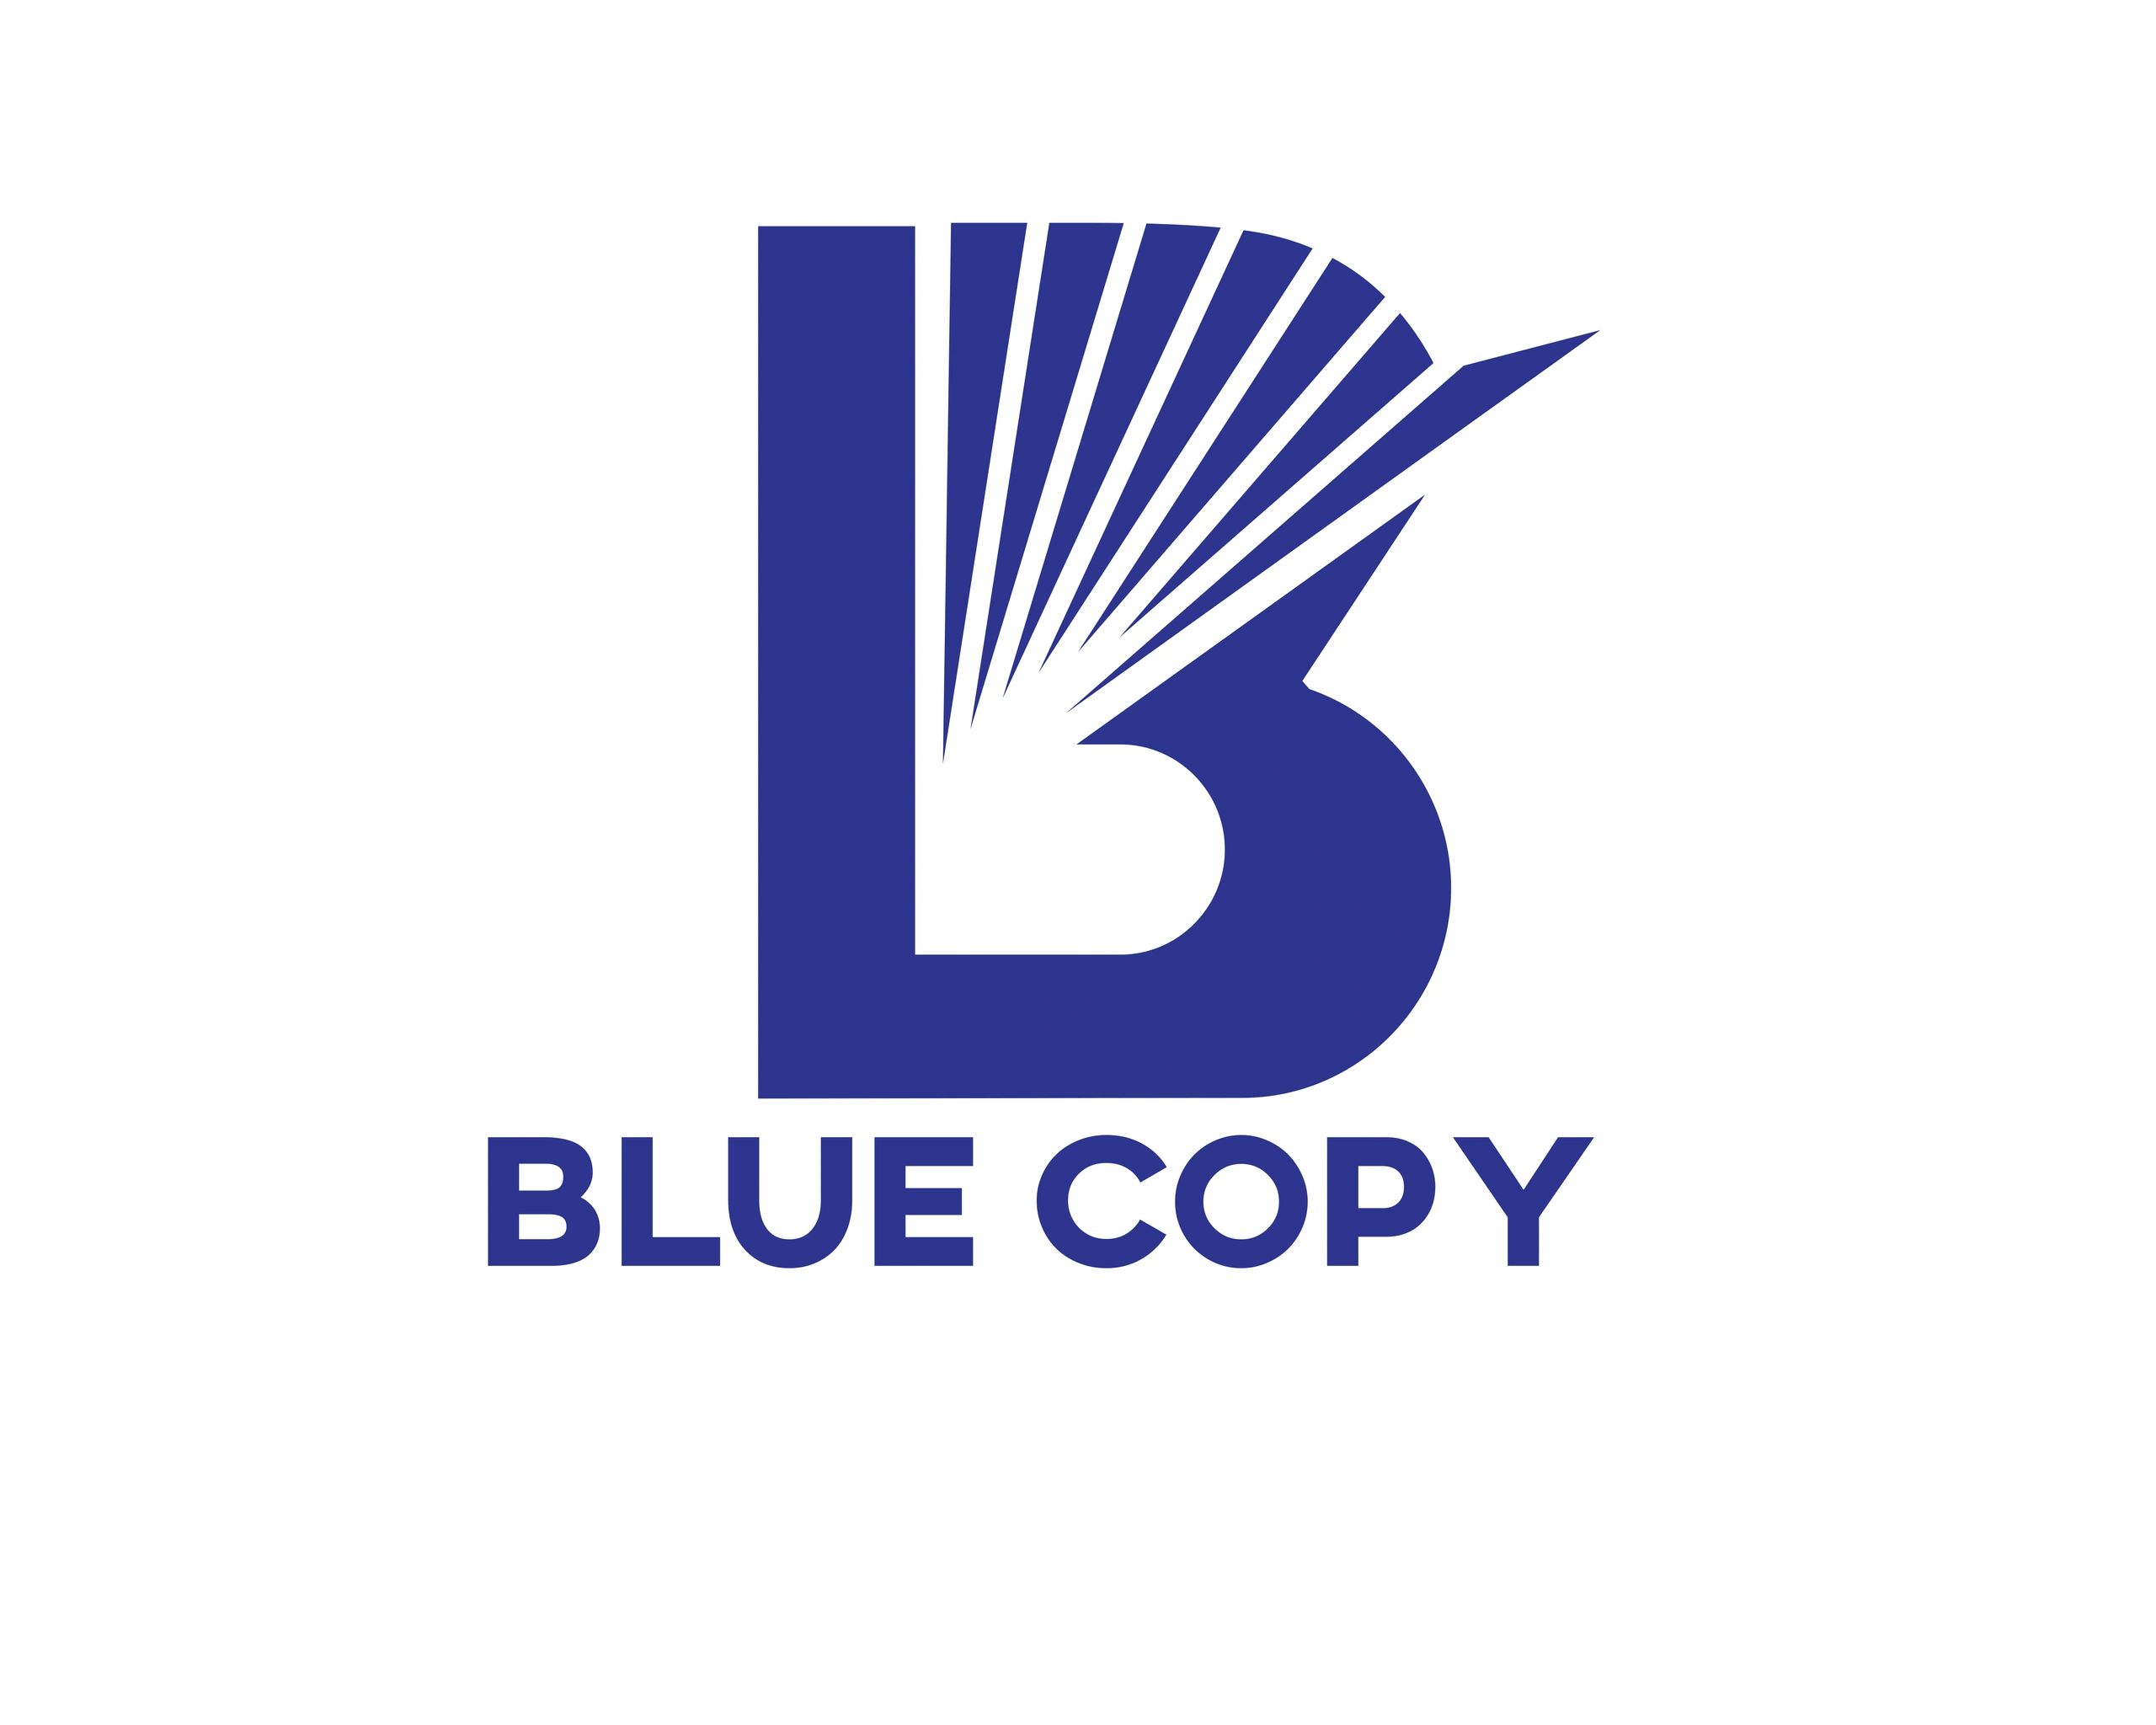 "Thousands saved, Efficiency Gained - Experience the Blue Copy Way" 